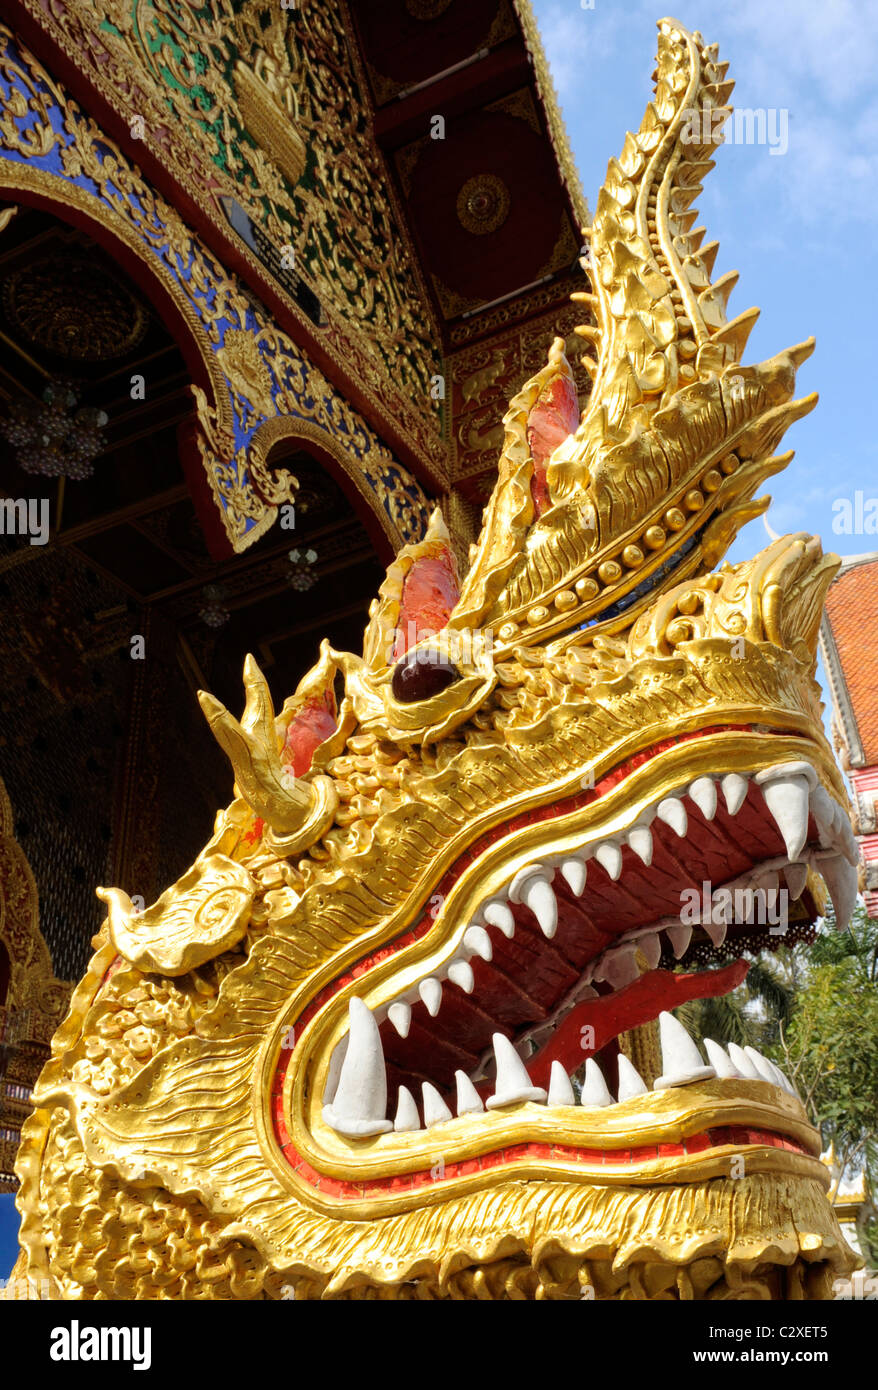 statue of golden coloured dragon head at entrance of main temple, wat mani phraison or Wat Manee Pai,Son, Mae Sot,  Thailand Stock Photo